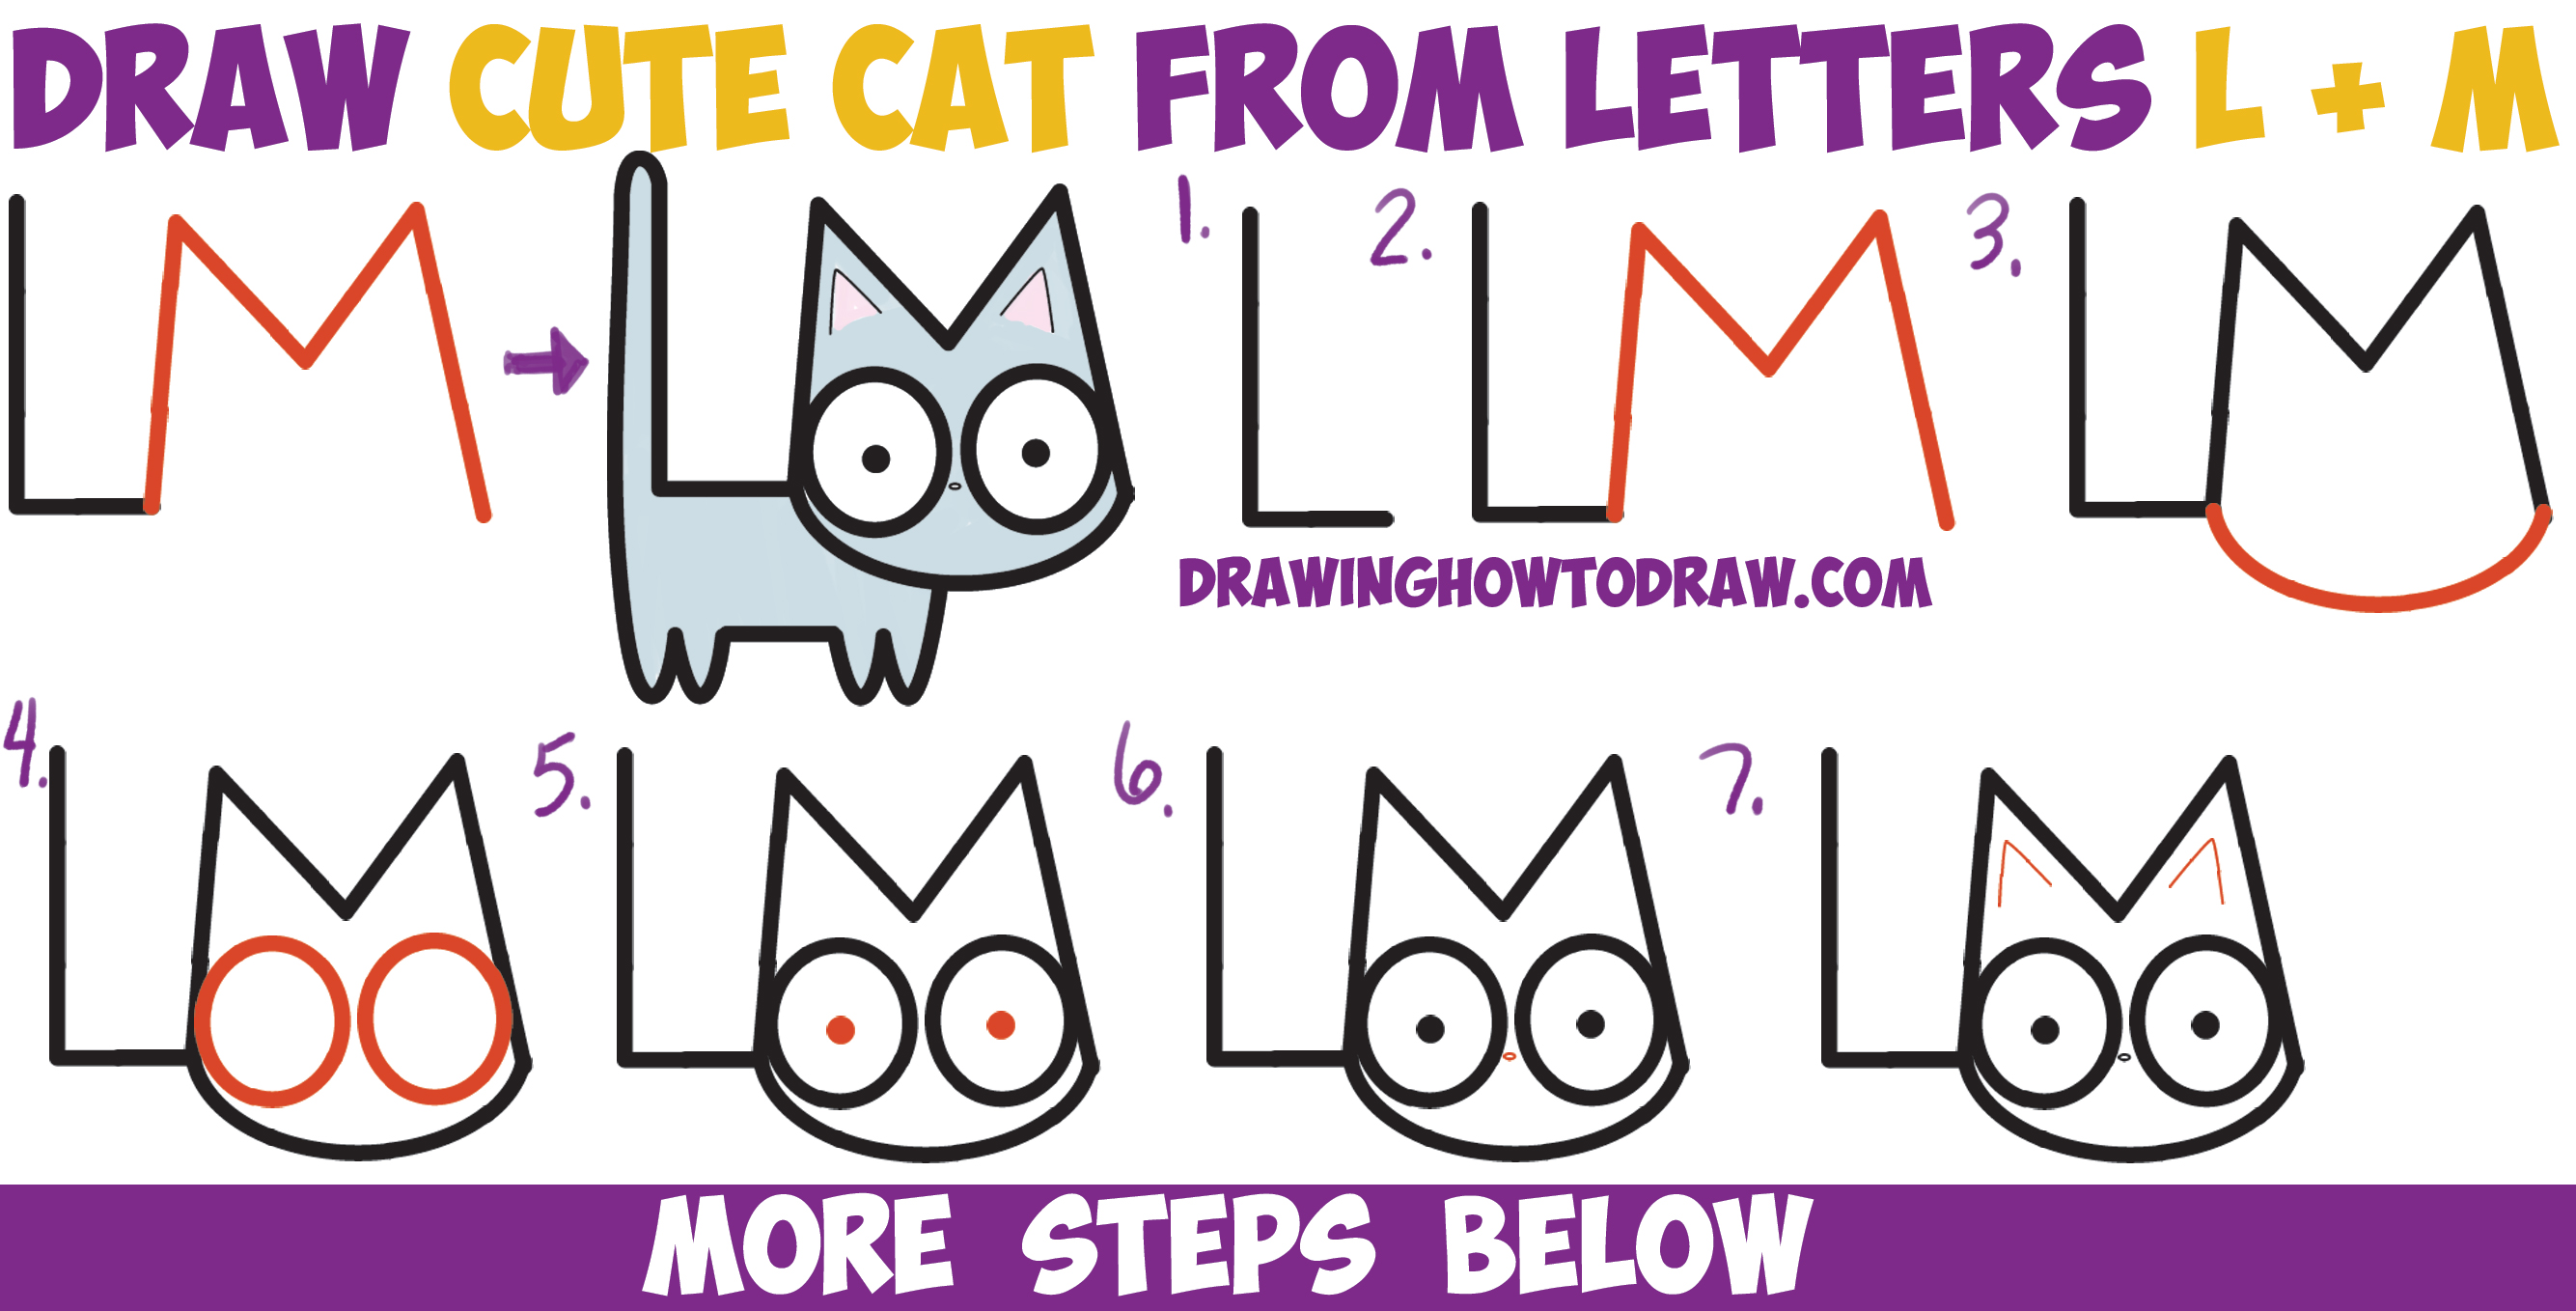 How to Draw a Cute Cartoon Kitten from Letters L + M Easy Step by Step Drawing Tutorial for Kids